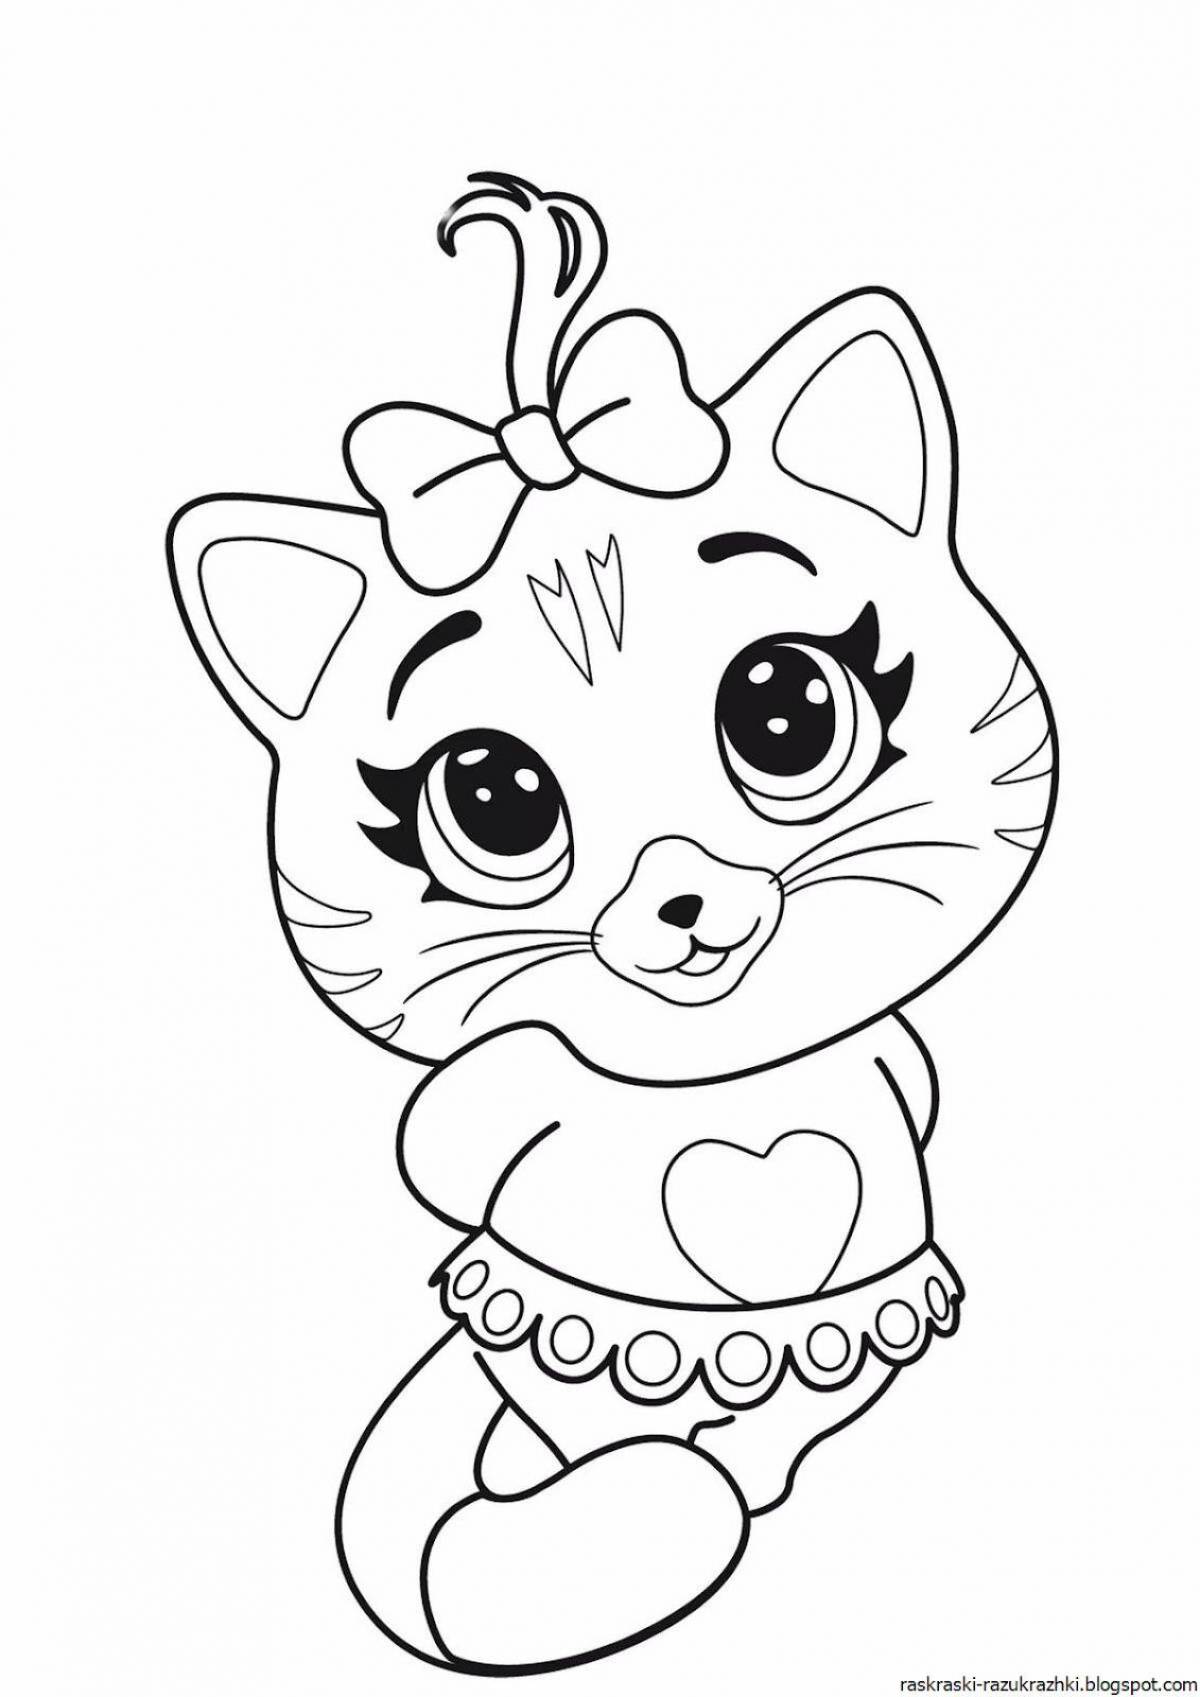 Nice coloring book for kitty girls